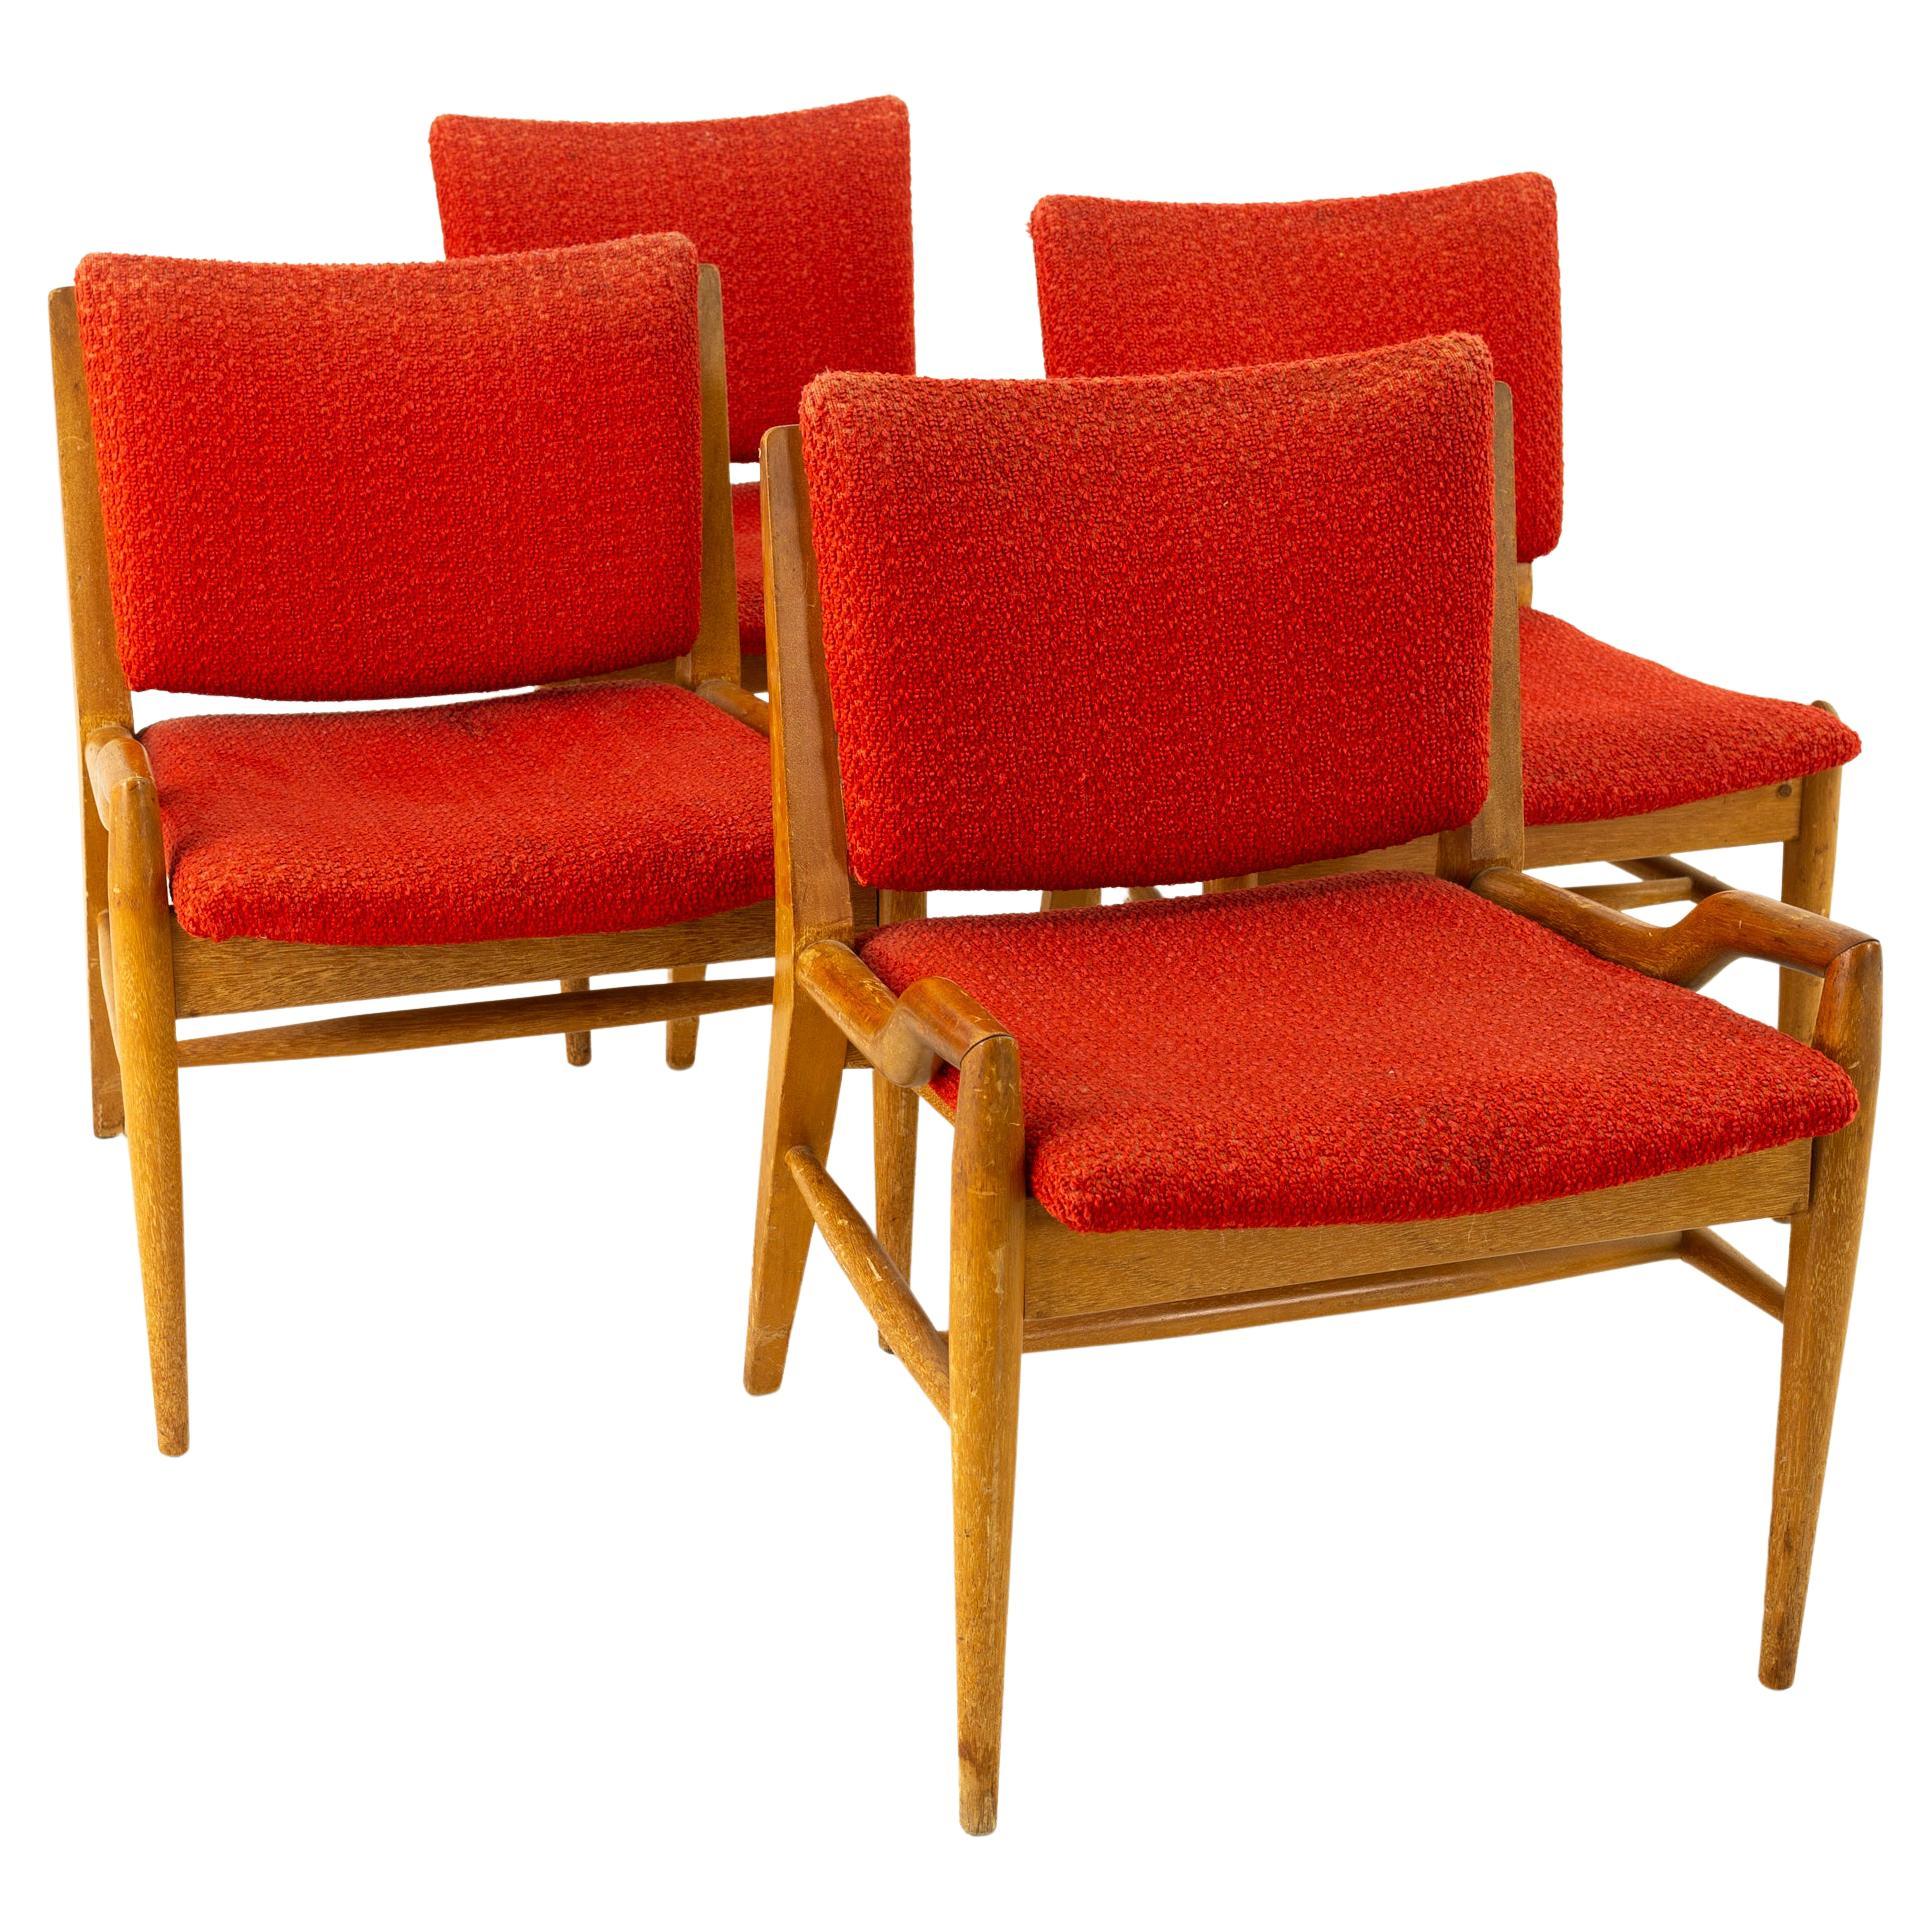 John Keal for Brown Saltman Mid Century mahogany dining chairs - Set of 6
Each chair measures 22.5 wide x 21.5 deep x 30 high with a seat height of 17 inches and an arm rest height of 19.5 inches.